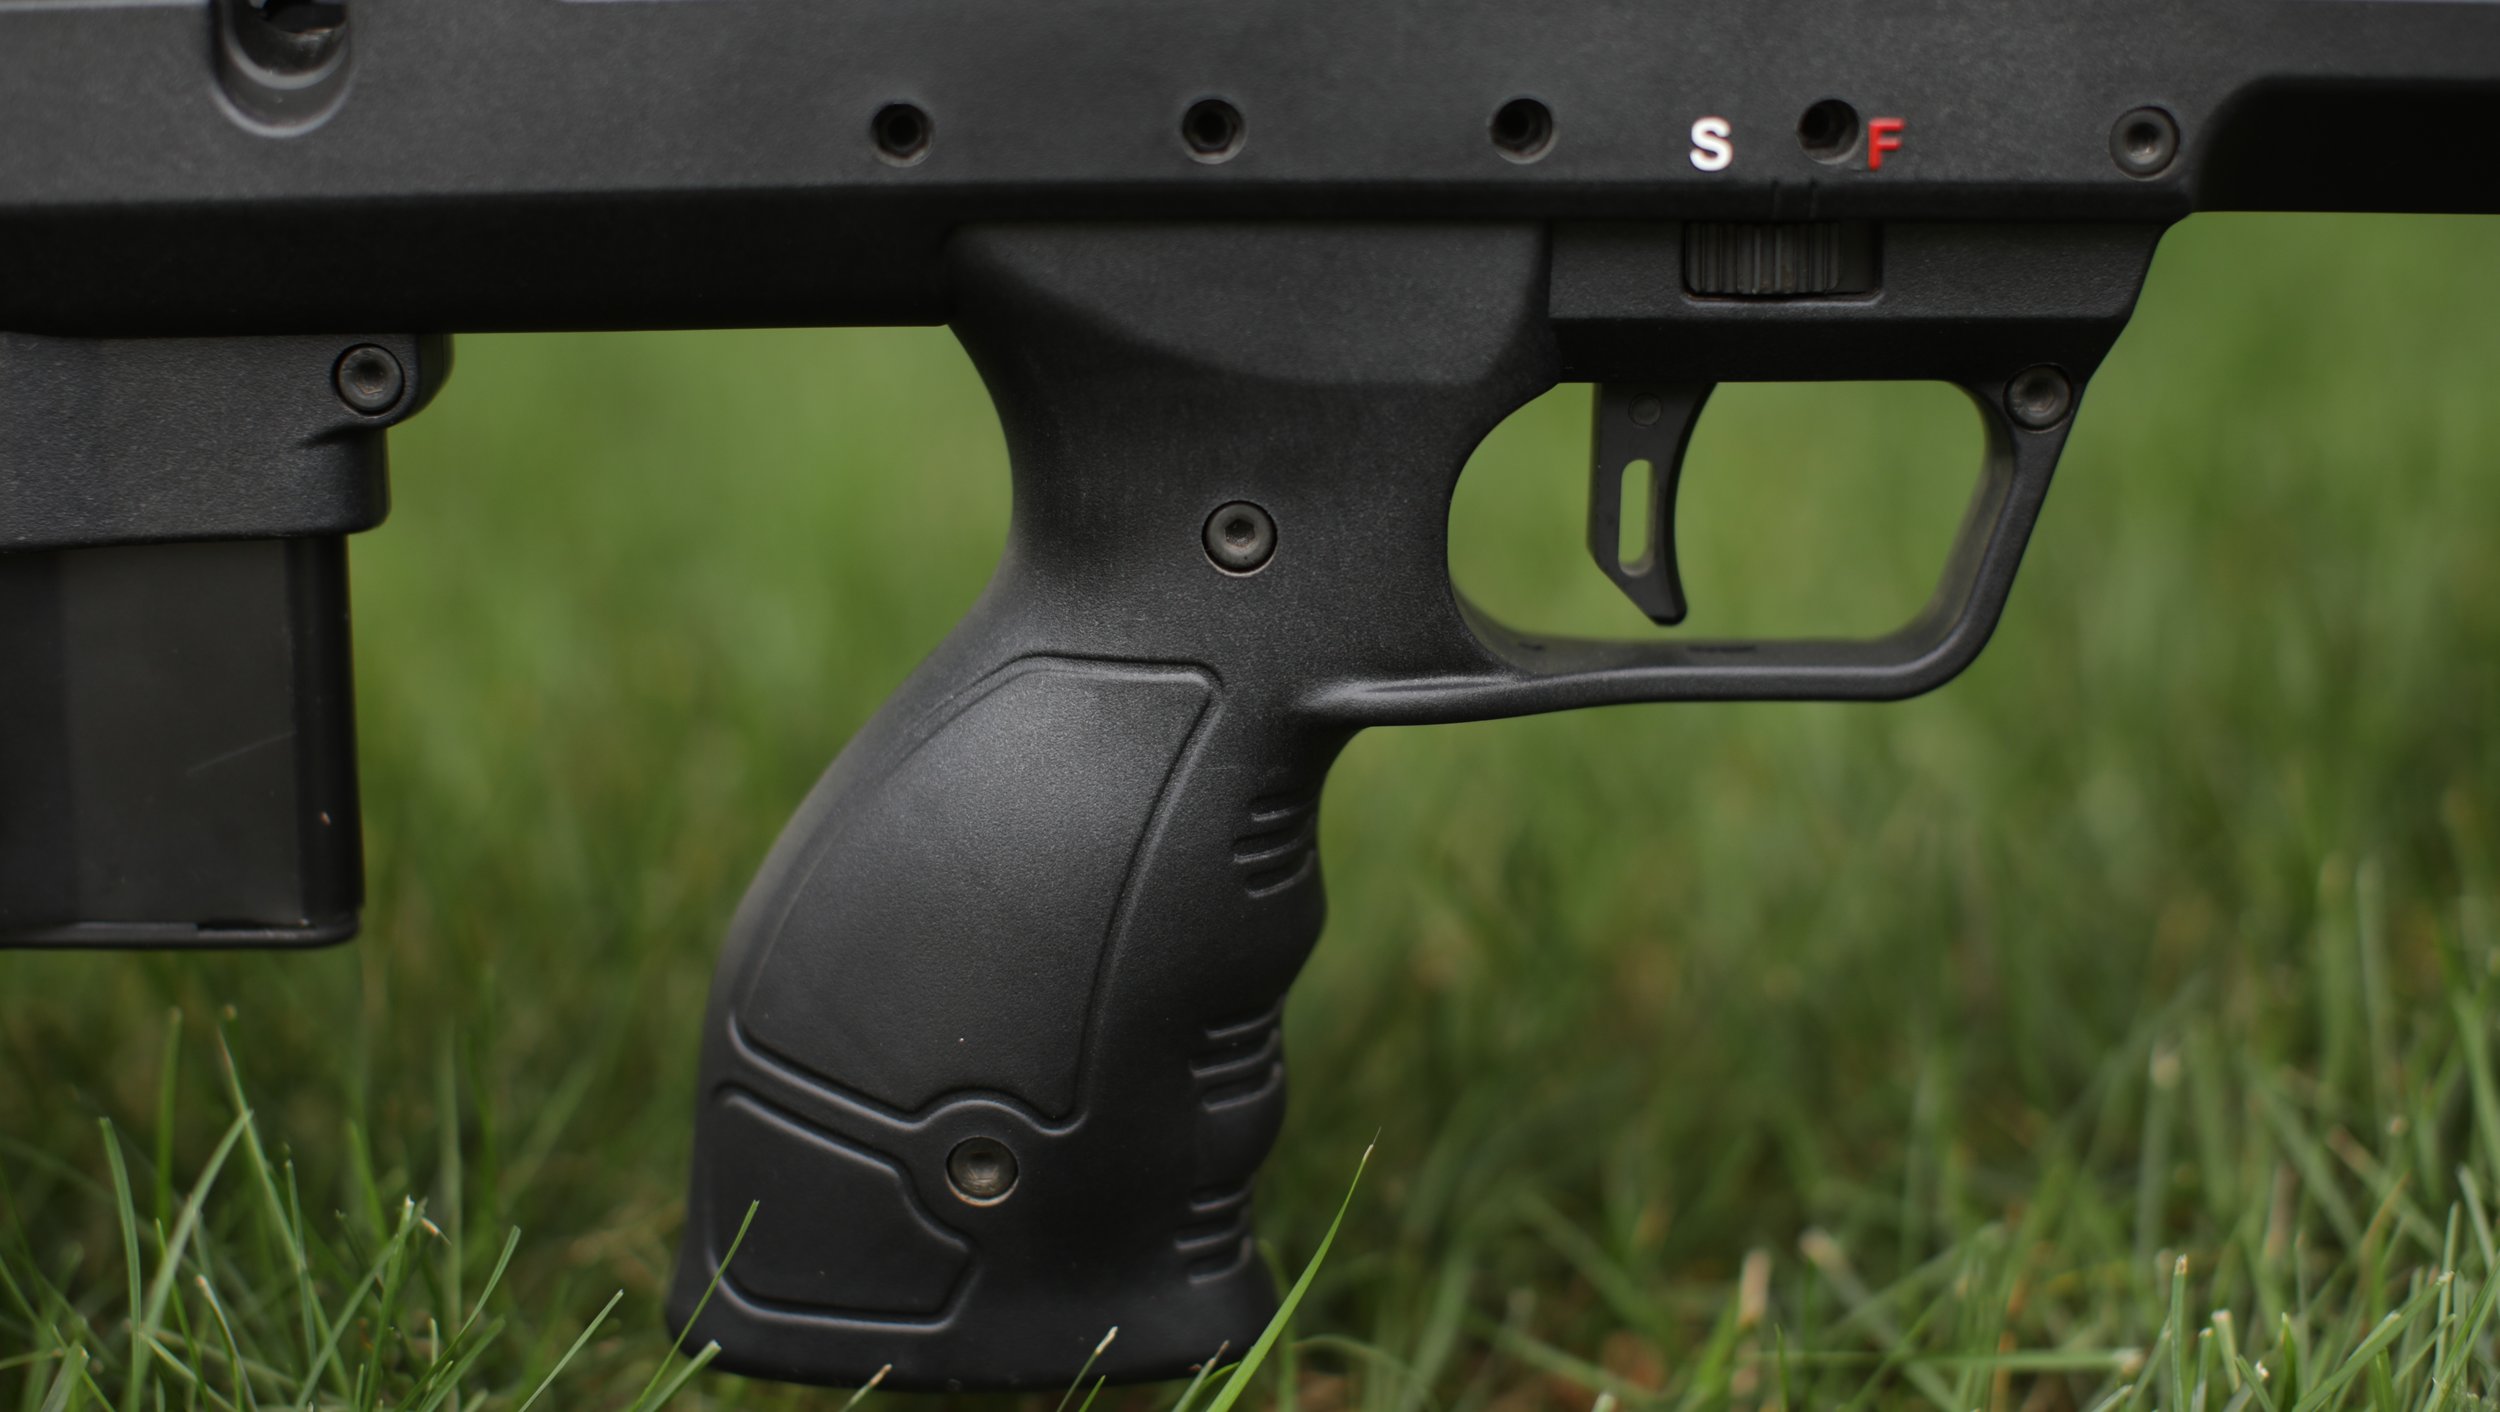 The SRS trigger is easily adjustable for both weight and creep.